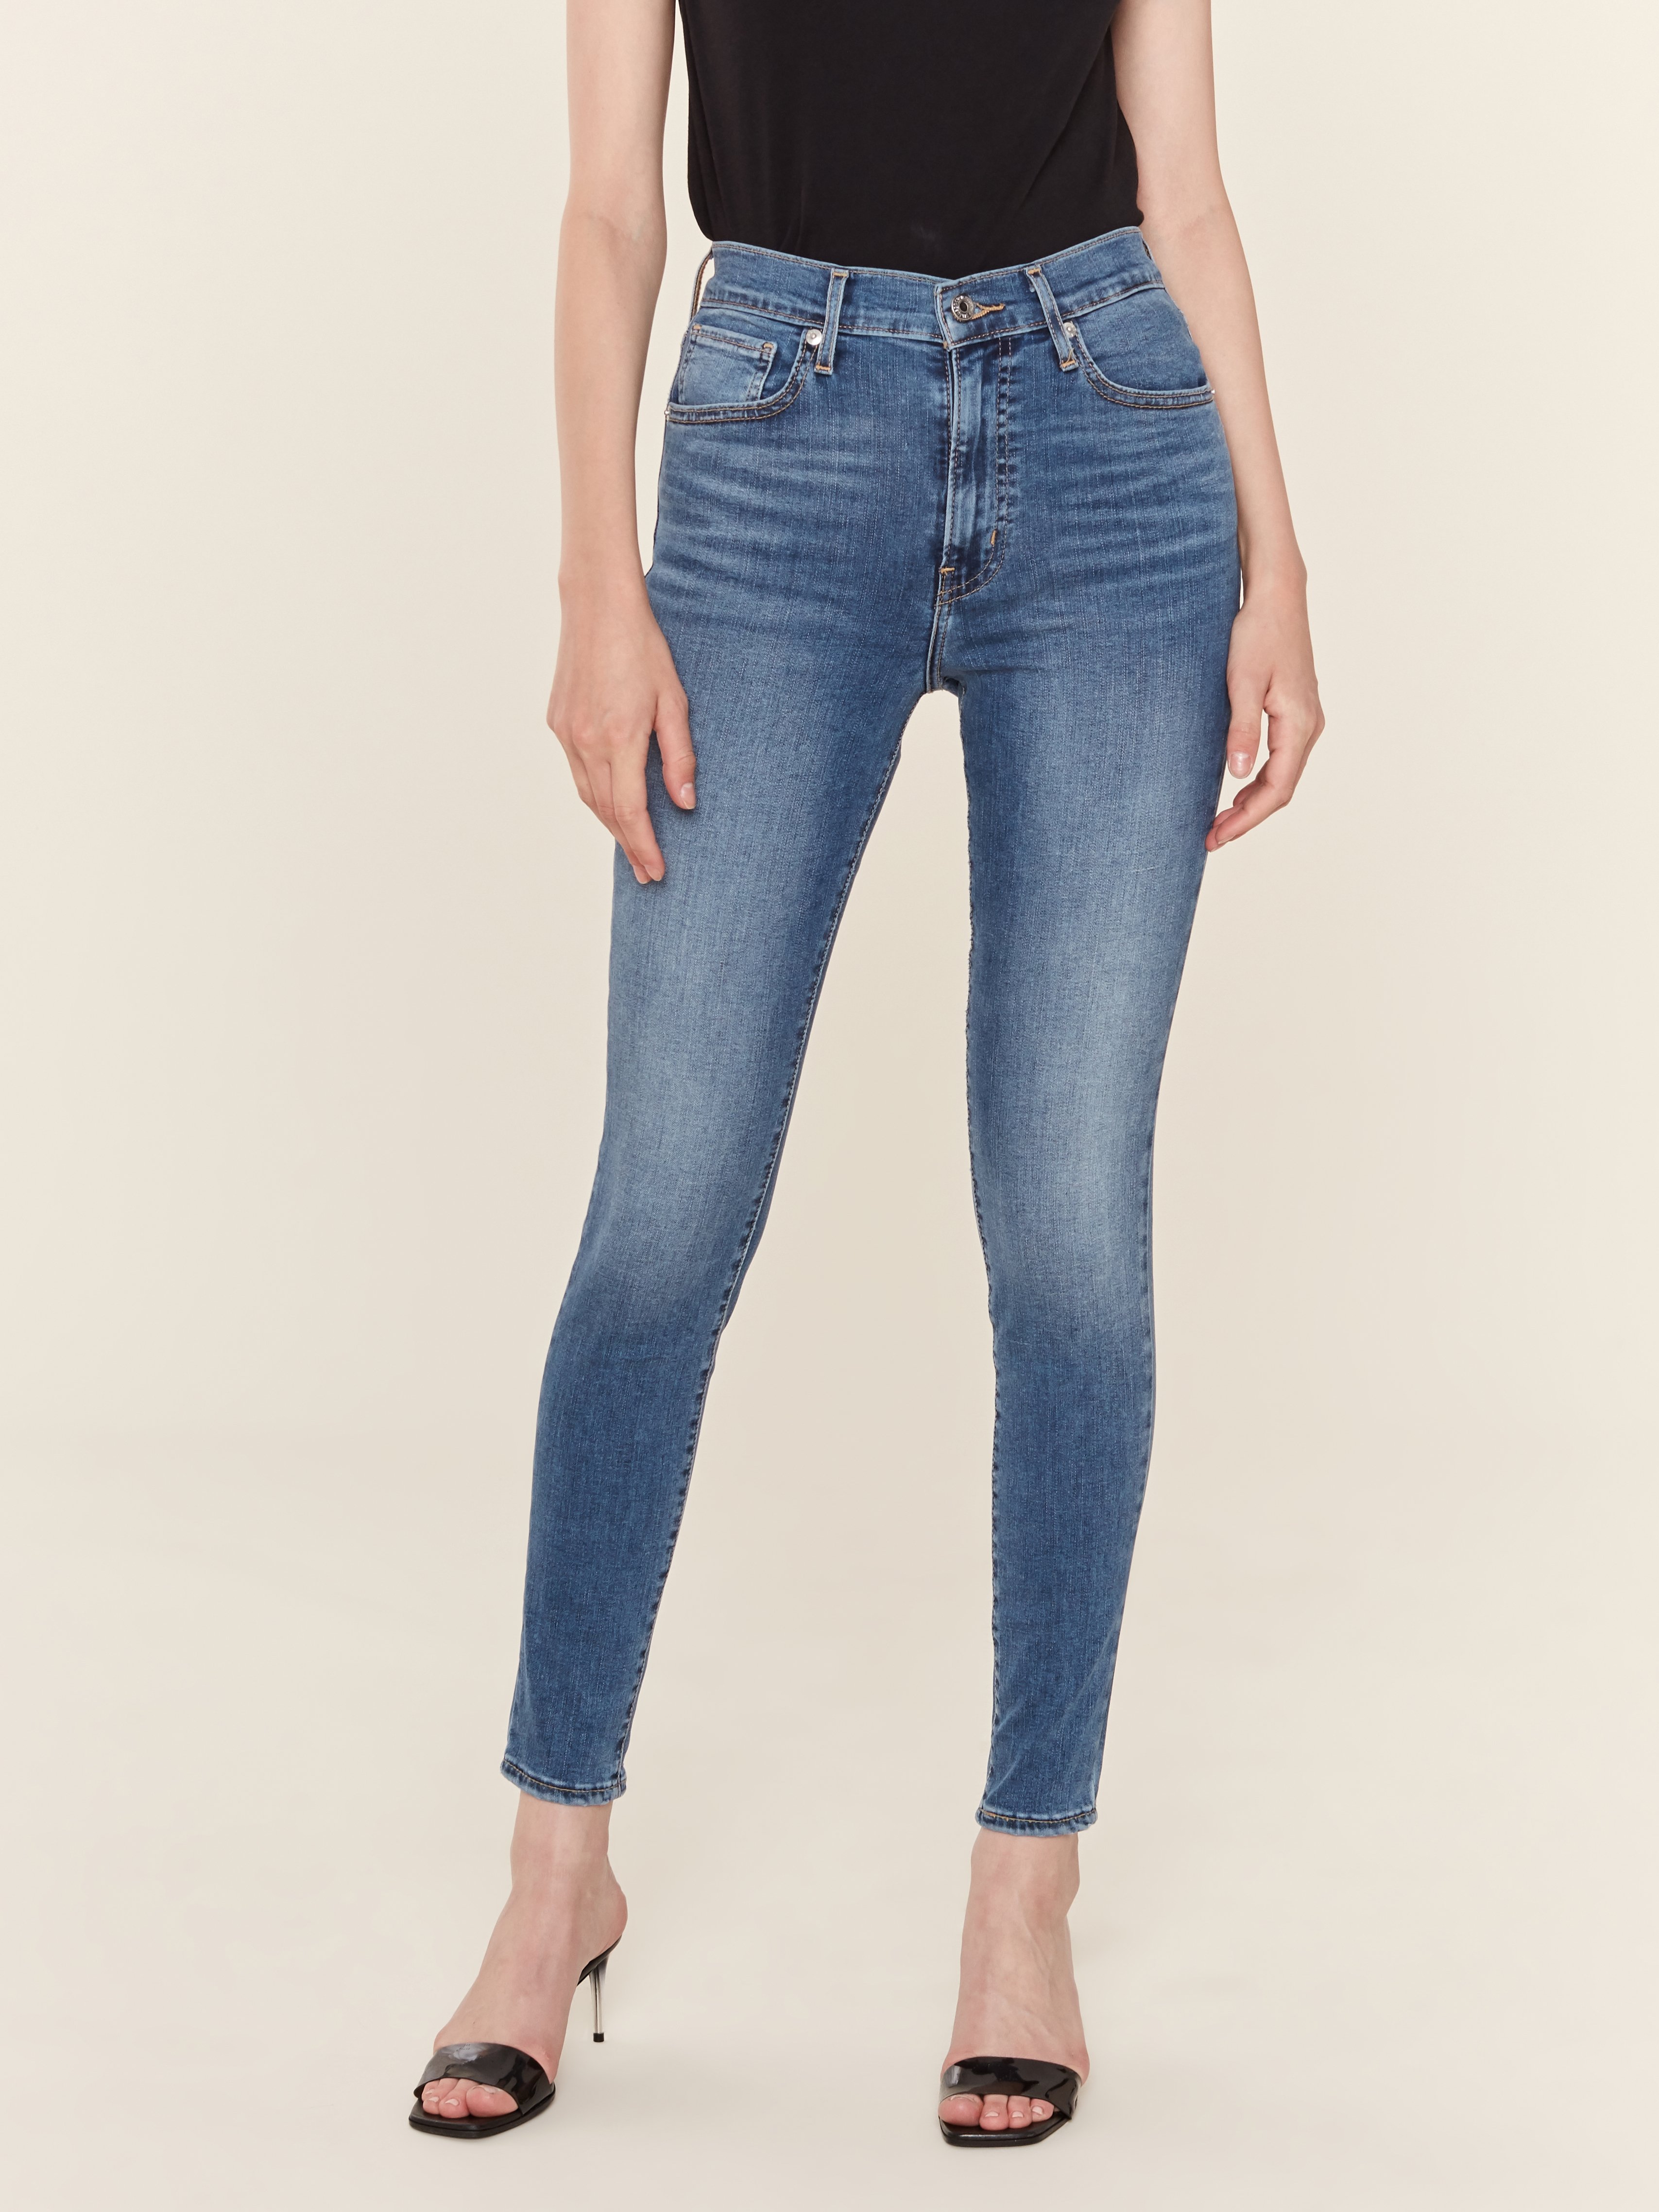 levi's mile high super skinny jeans review